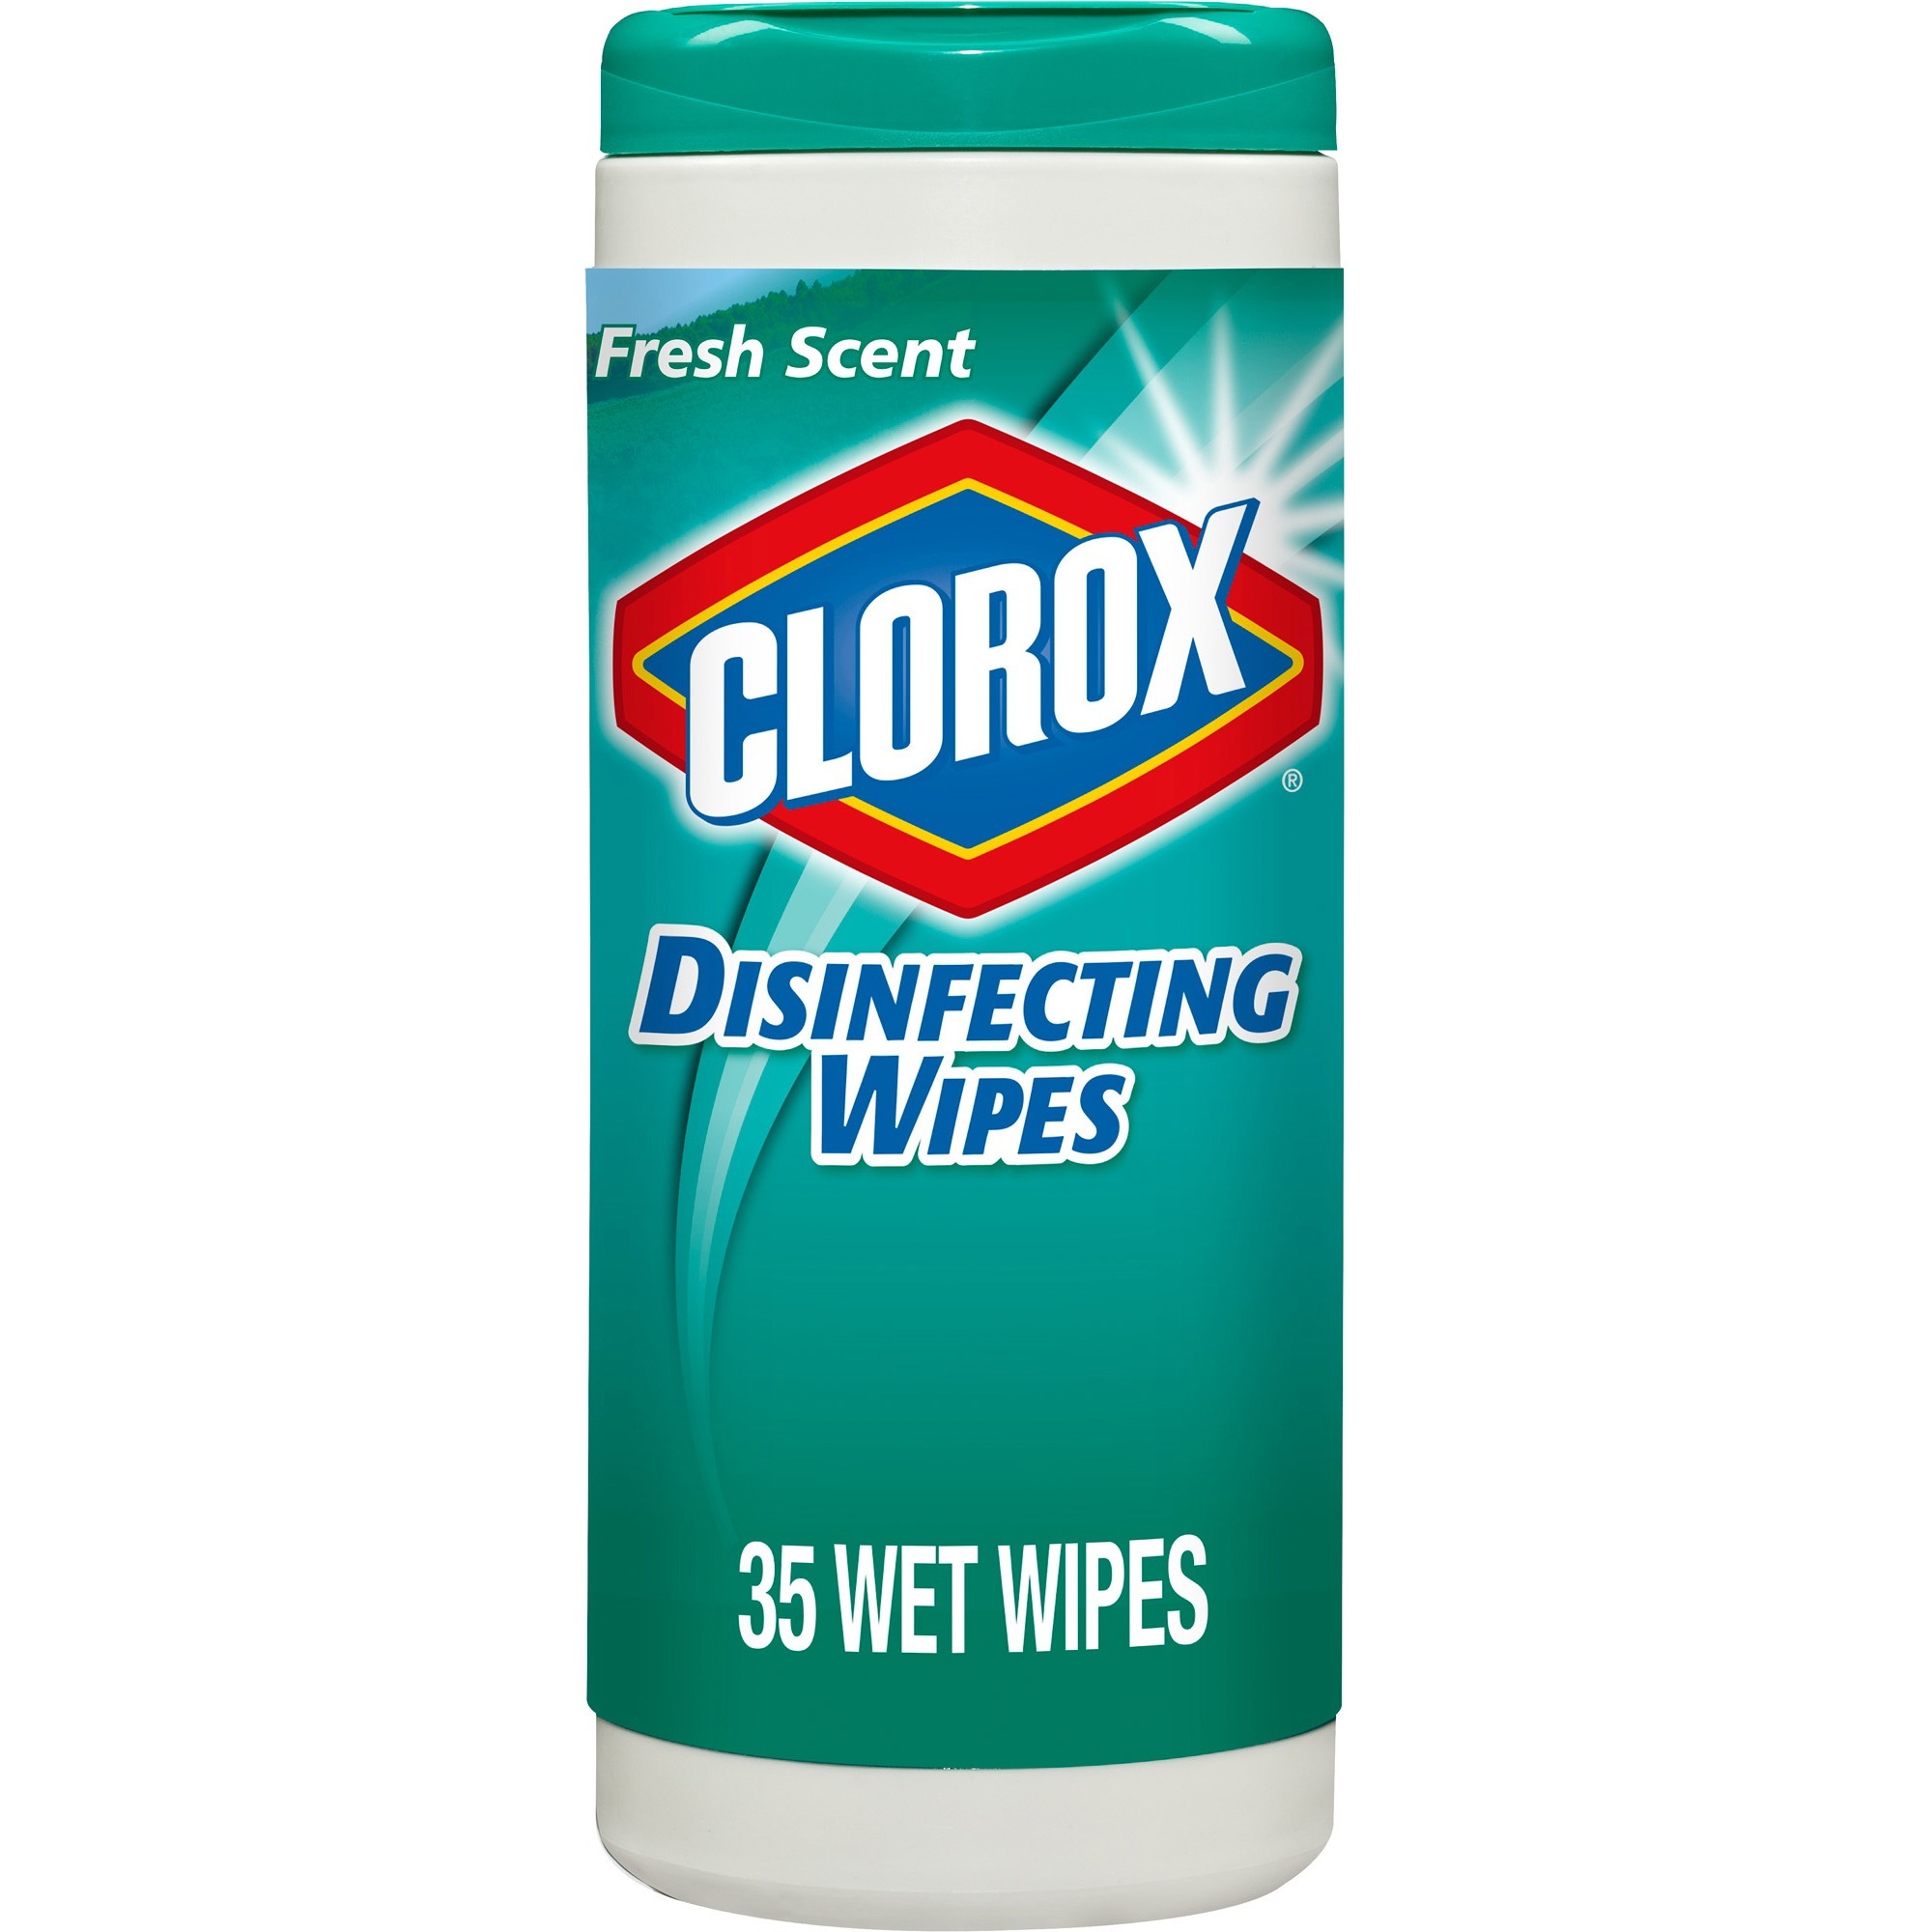 CLOROX DISINFECTING WIPES
FRESH SCENT 12tubs/35ct